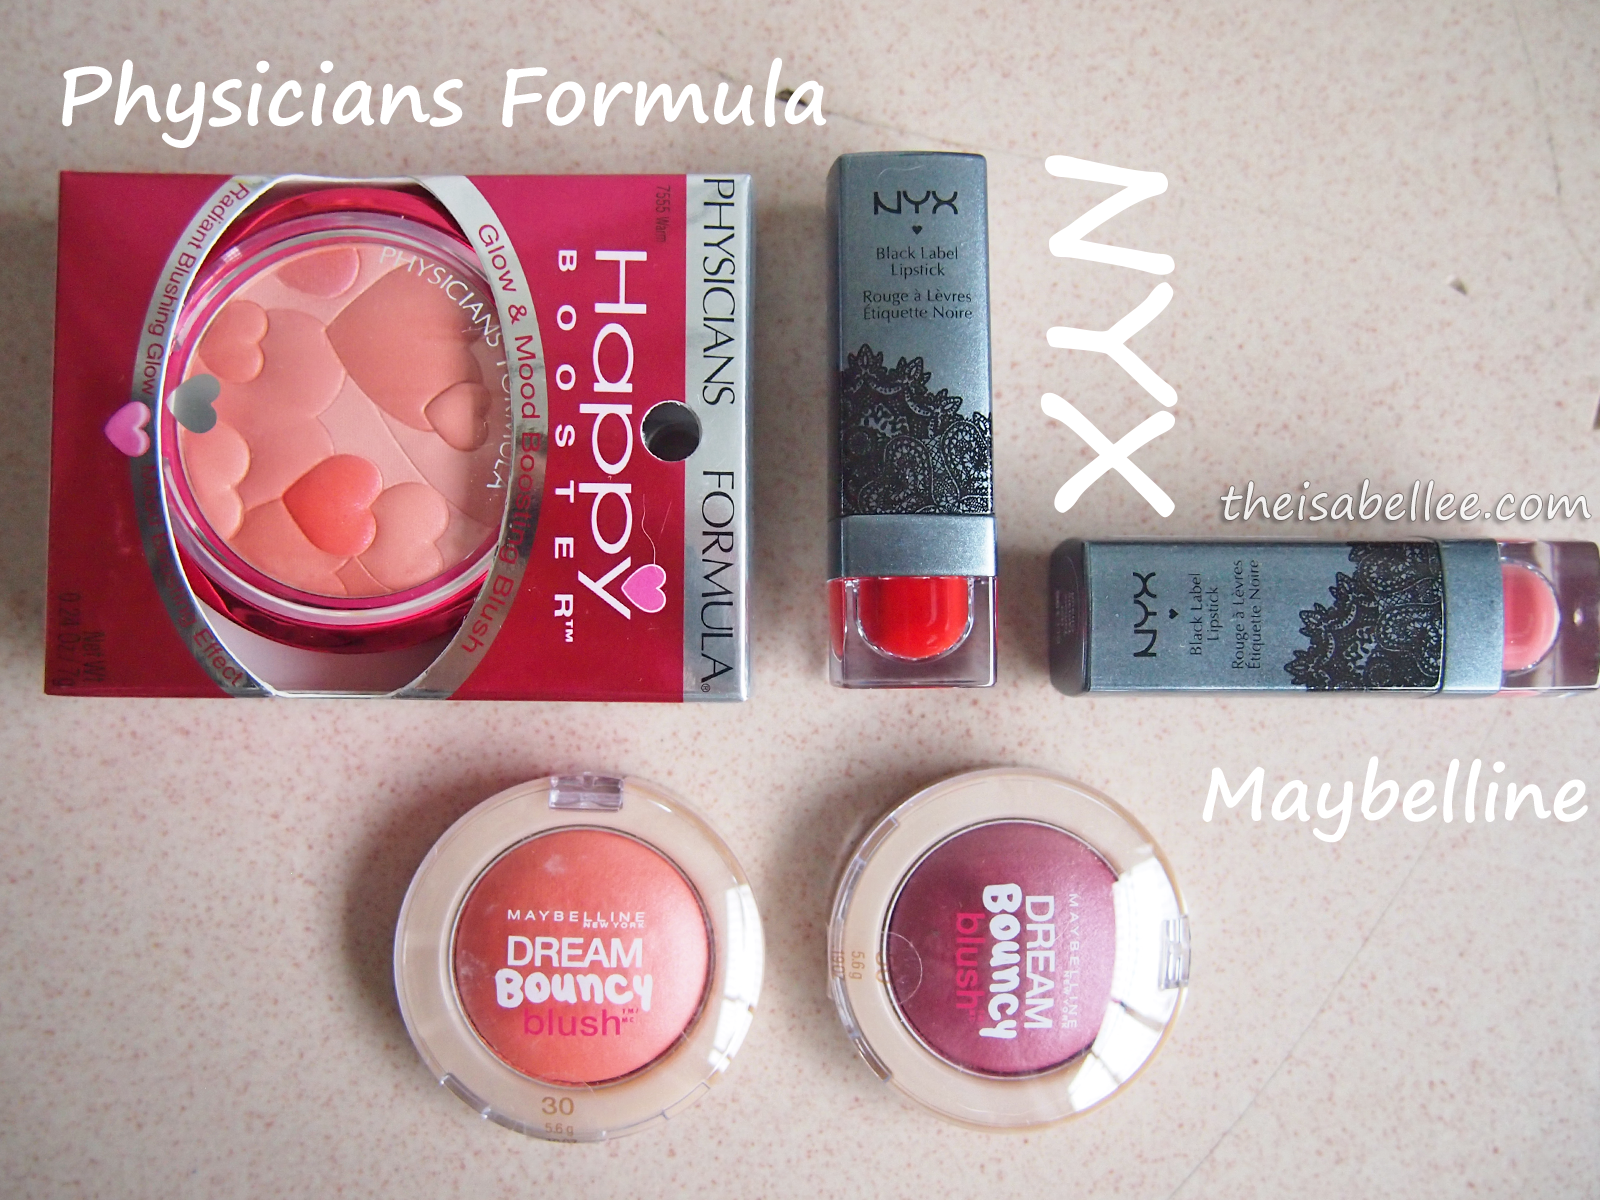 Physicians Formula, NYX Cosmetics and Maybelline